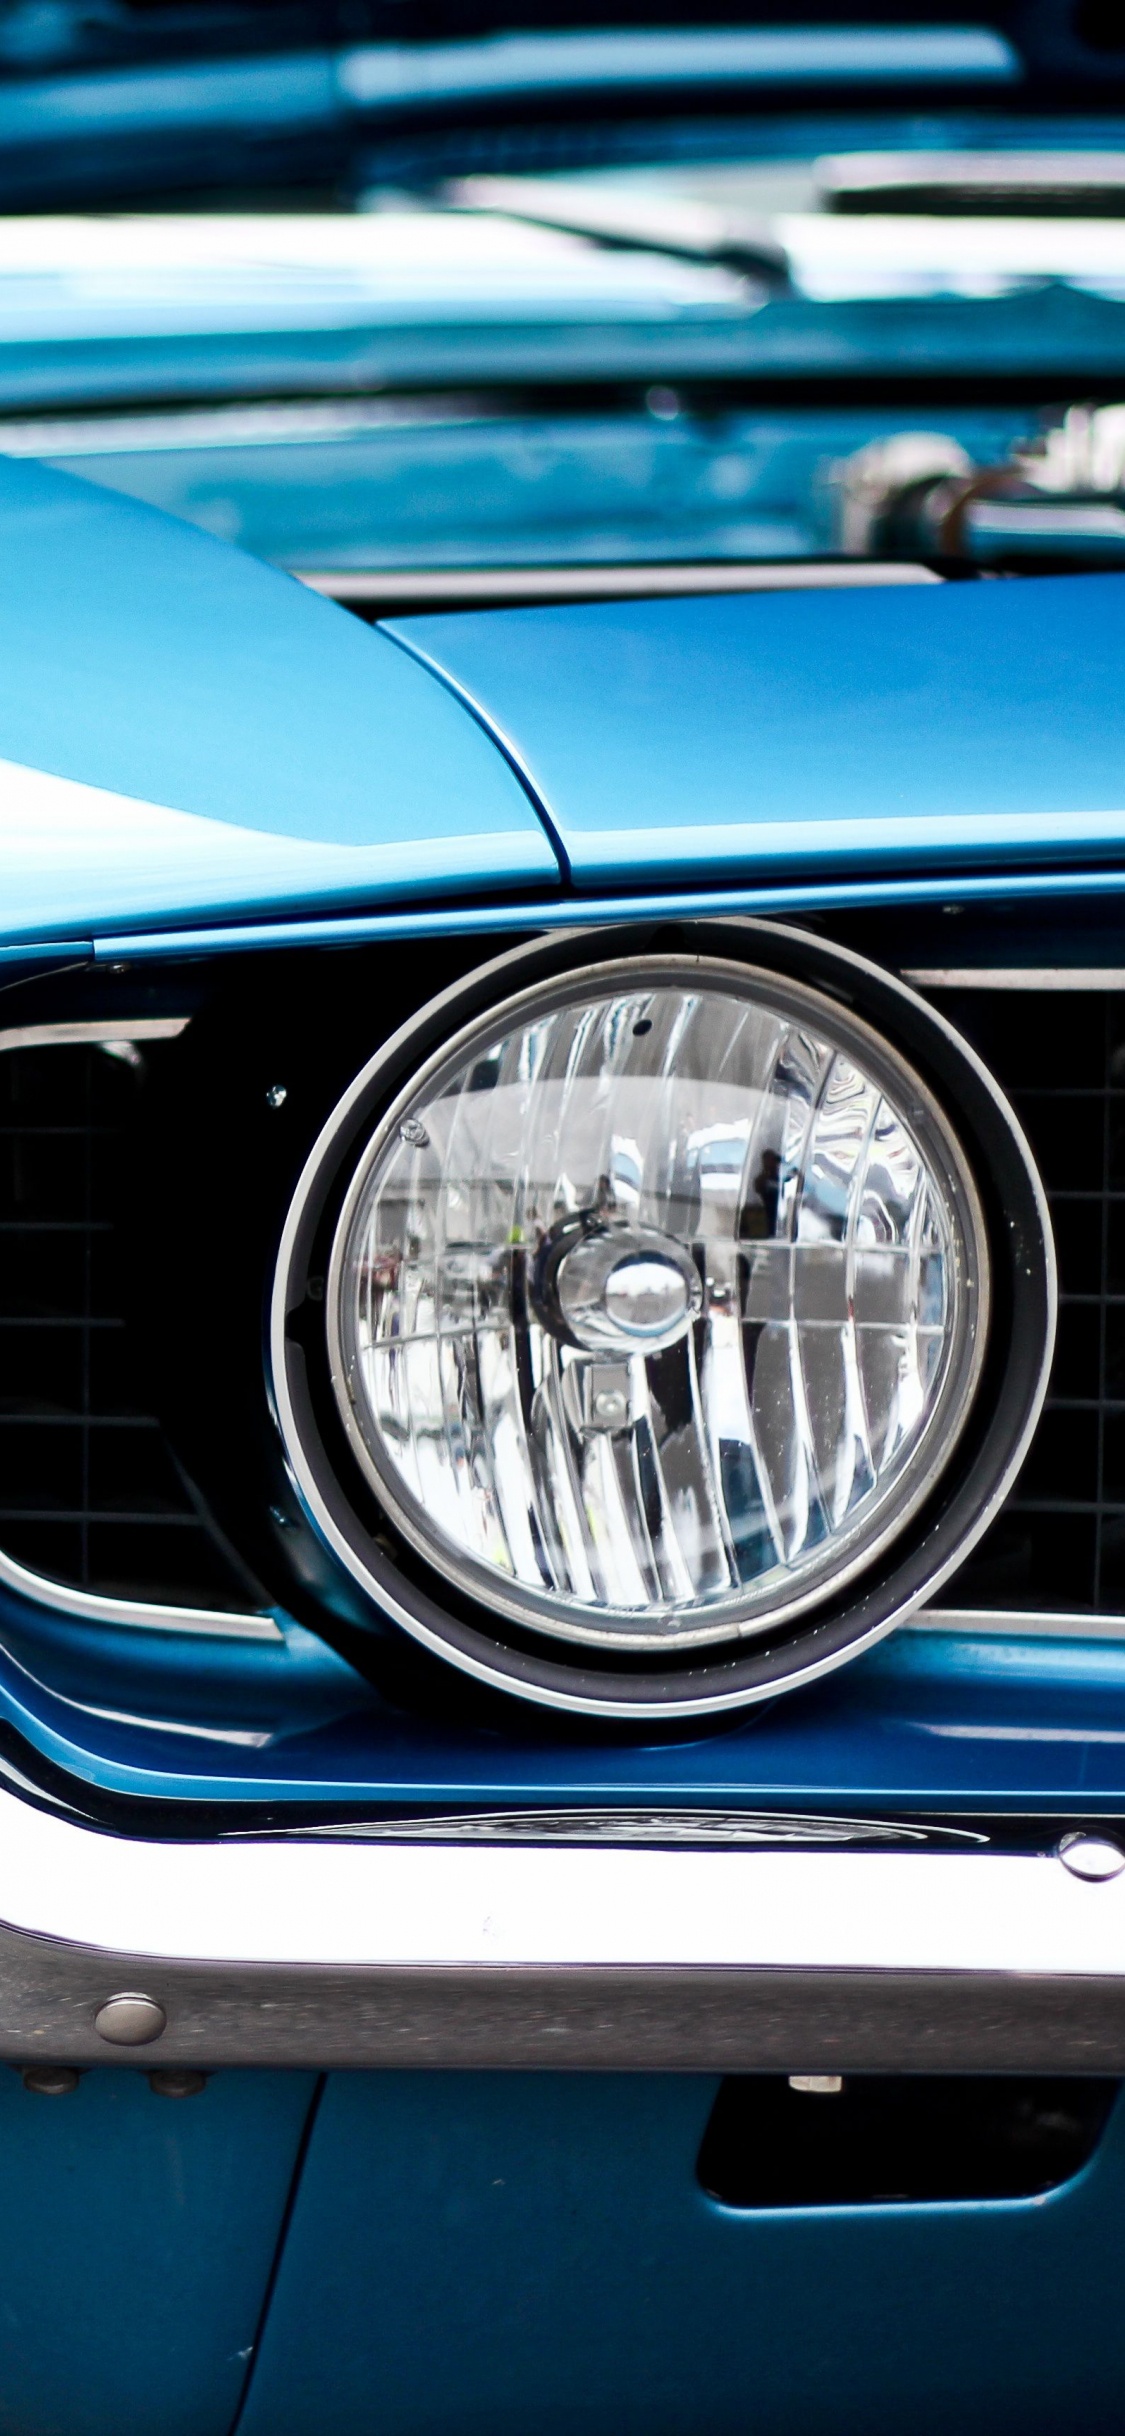 Blue Car With Chrome Wheel. Wallpaper in 1125x2436 Resolution